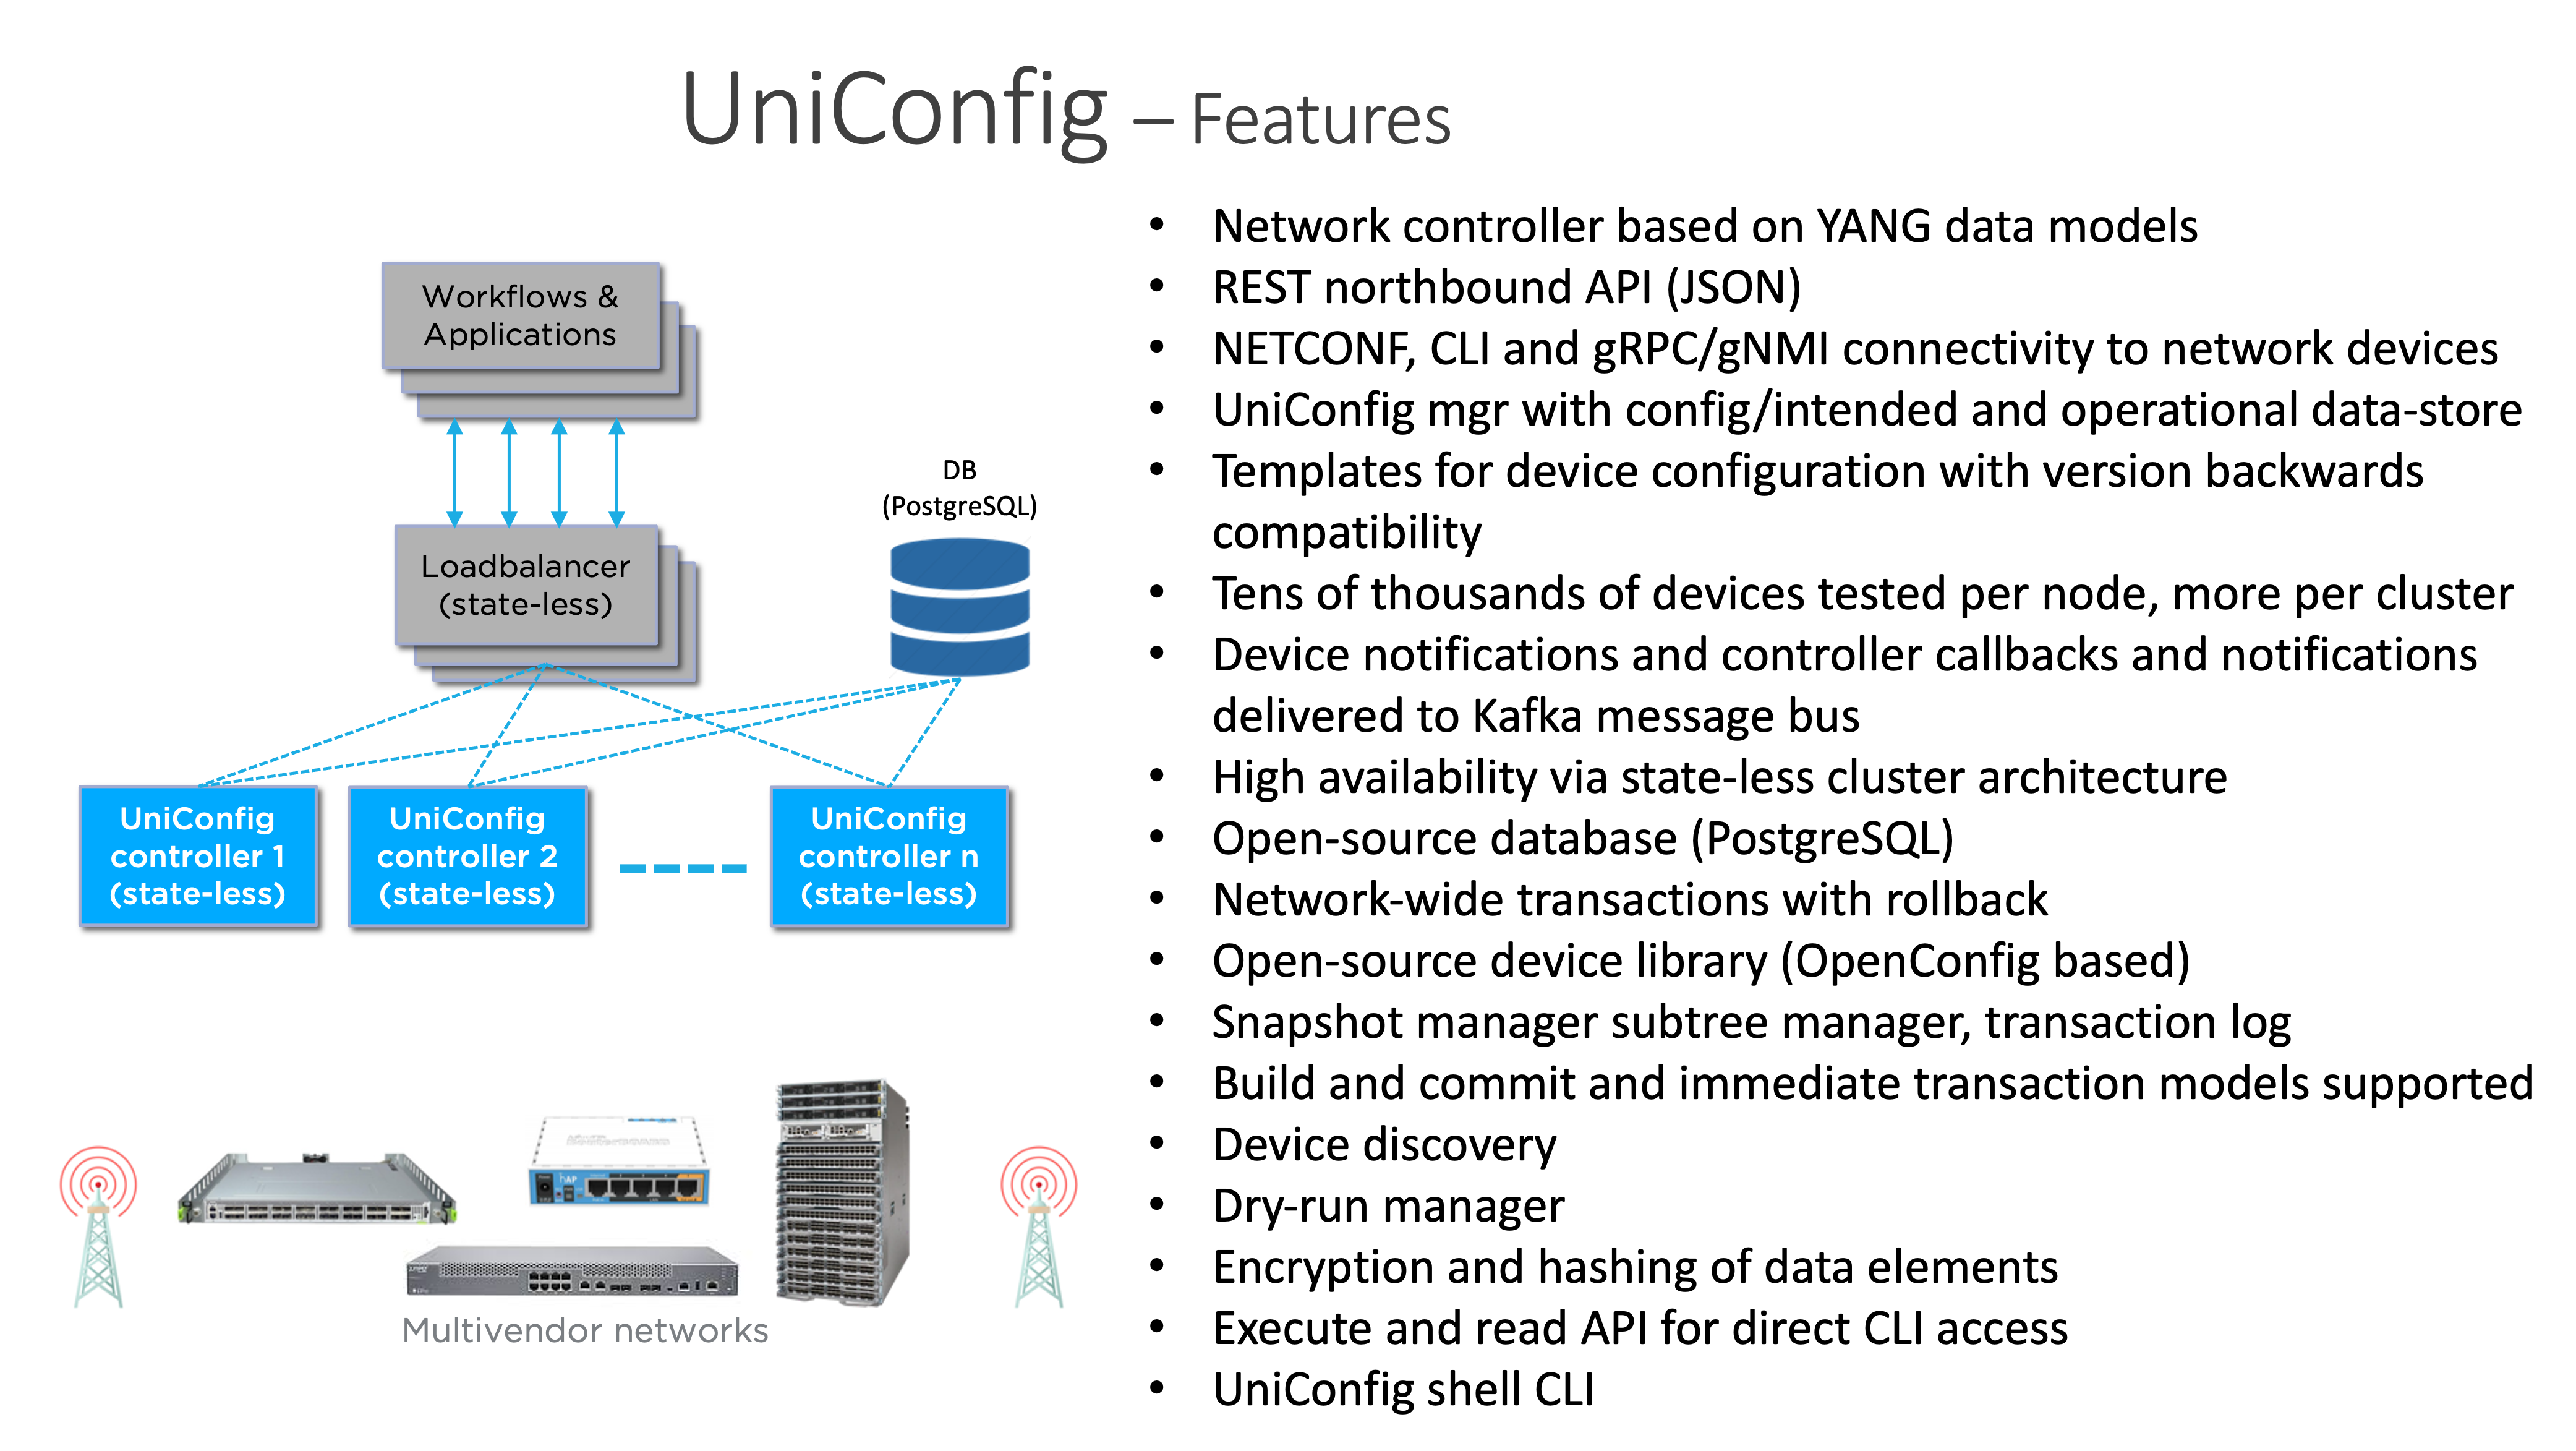 UniConfig features